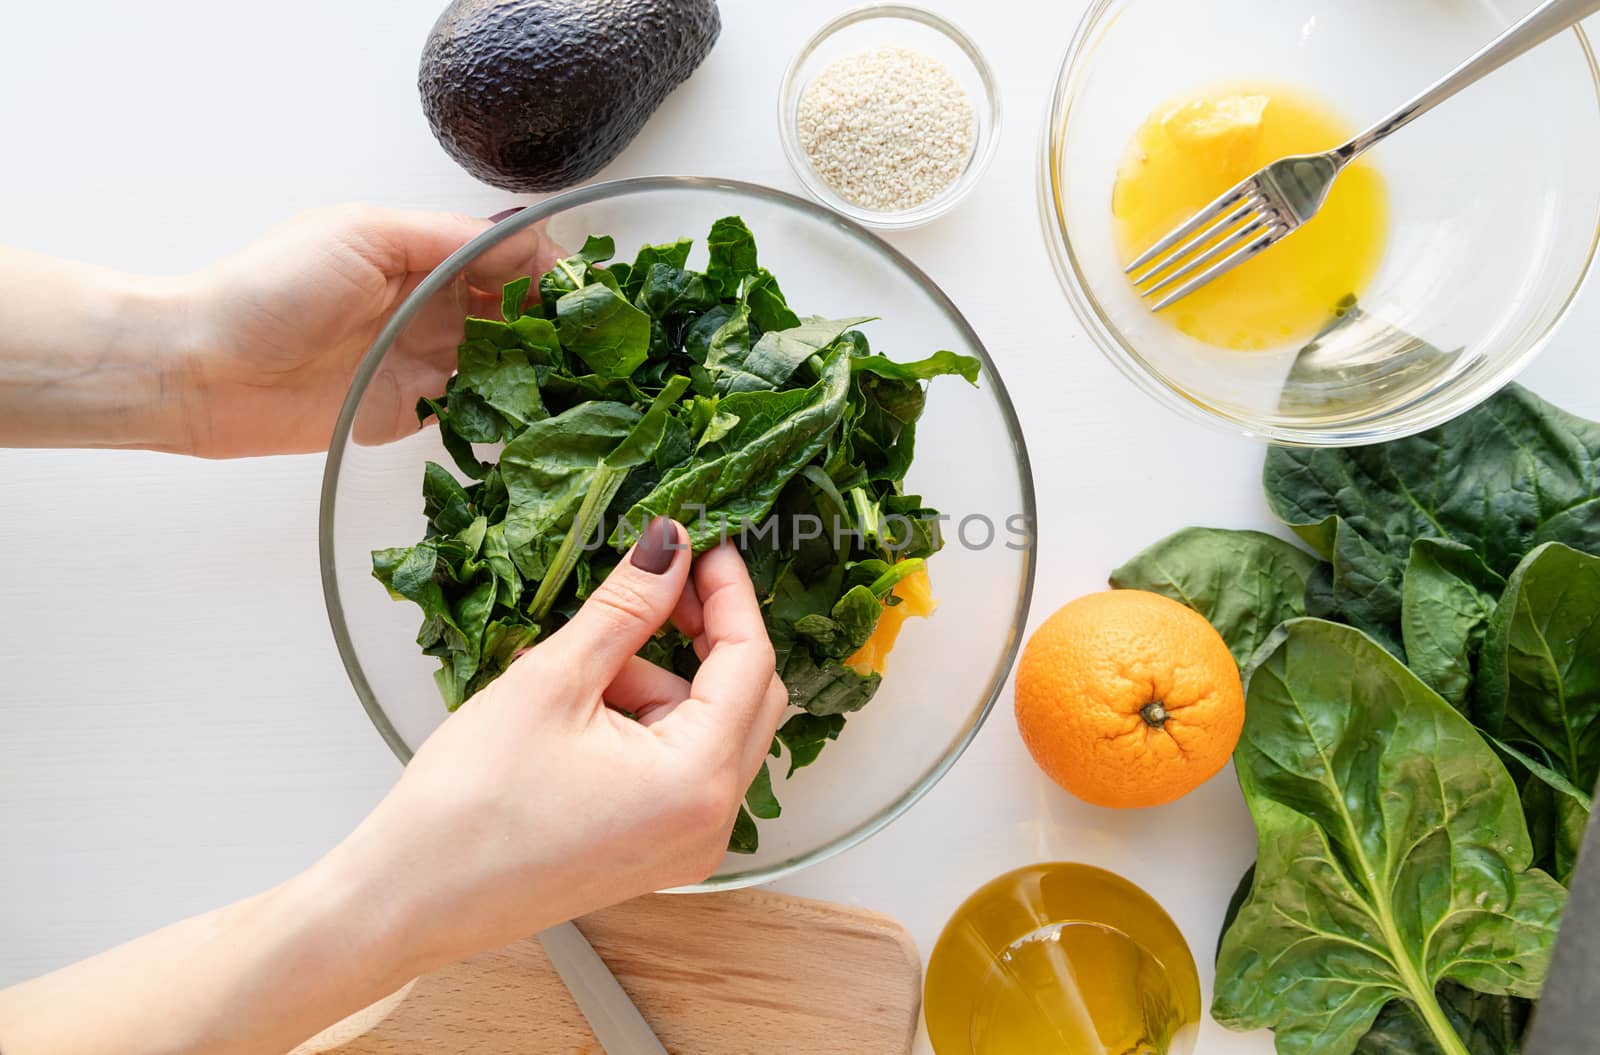 Step by step preparation of spinach, avocado and orange salad. Step 6 - putting together and mixing all ingredients, top view, selective focus